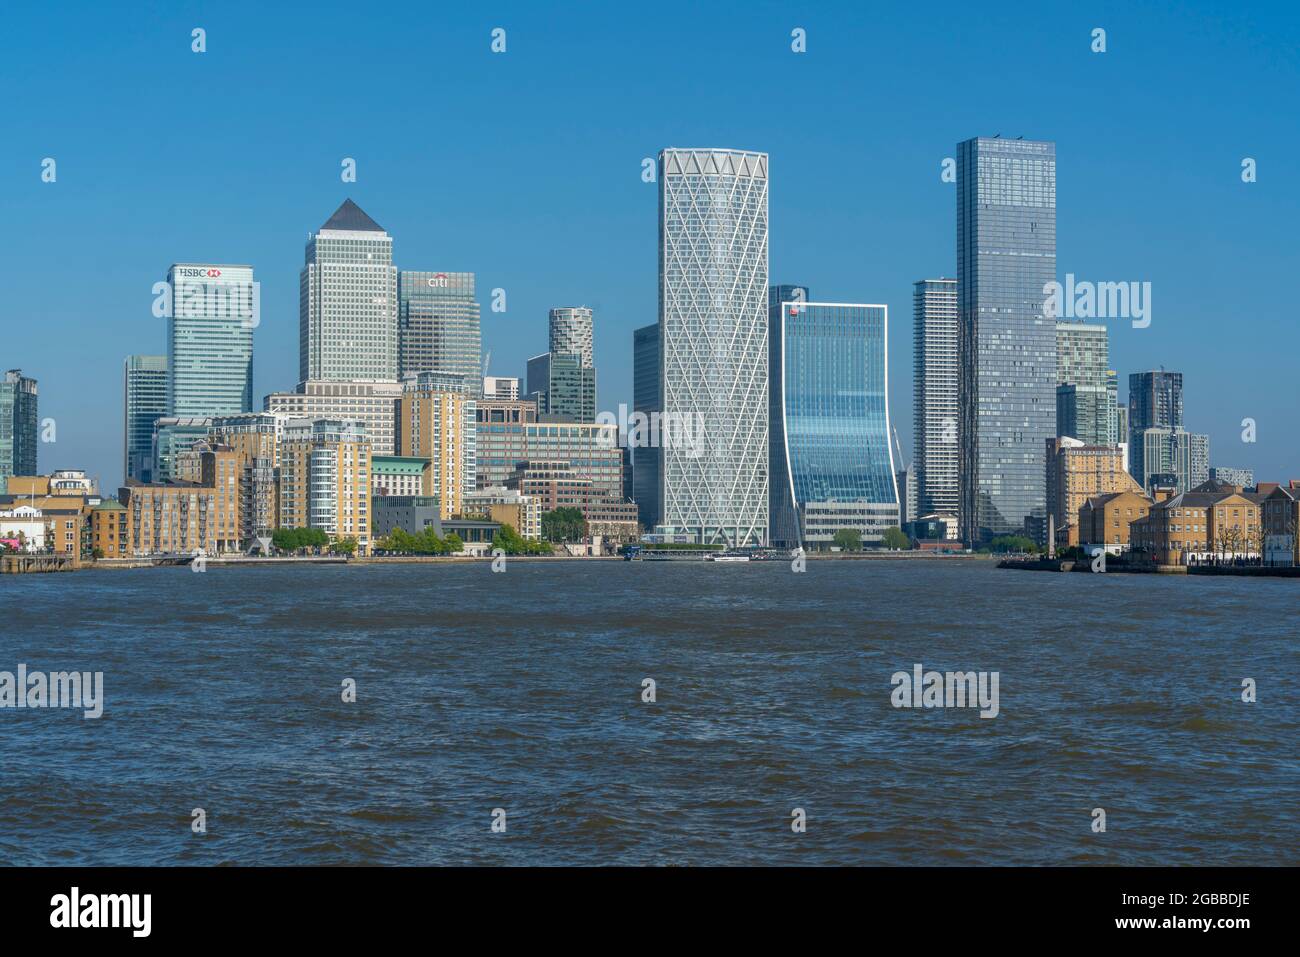 View of Canary Wharf tall buildings from the Thames Path, London, England, United Kingdom, Europe Stock Photo